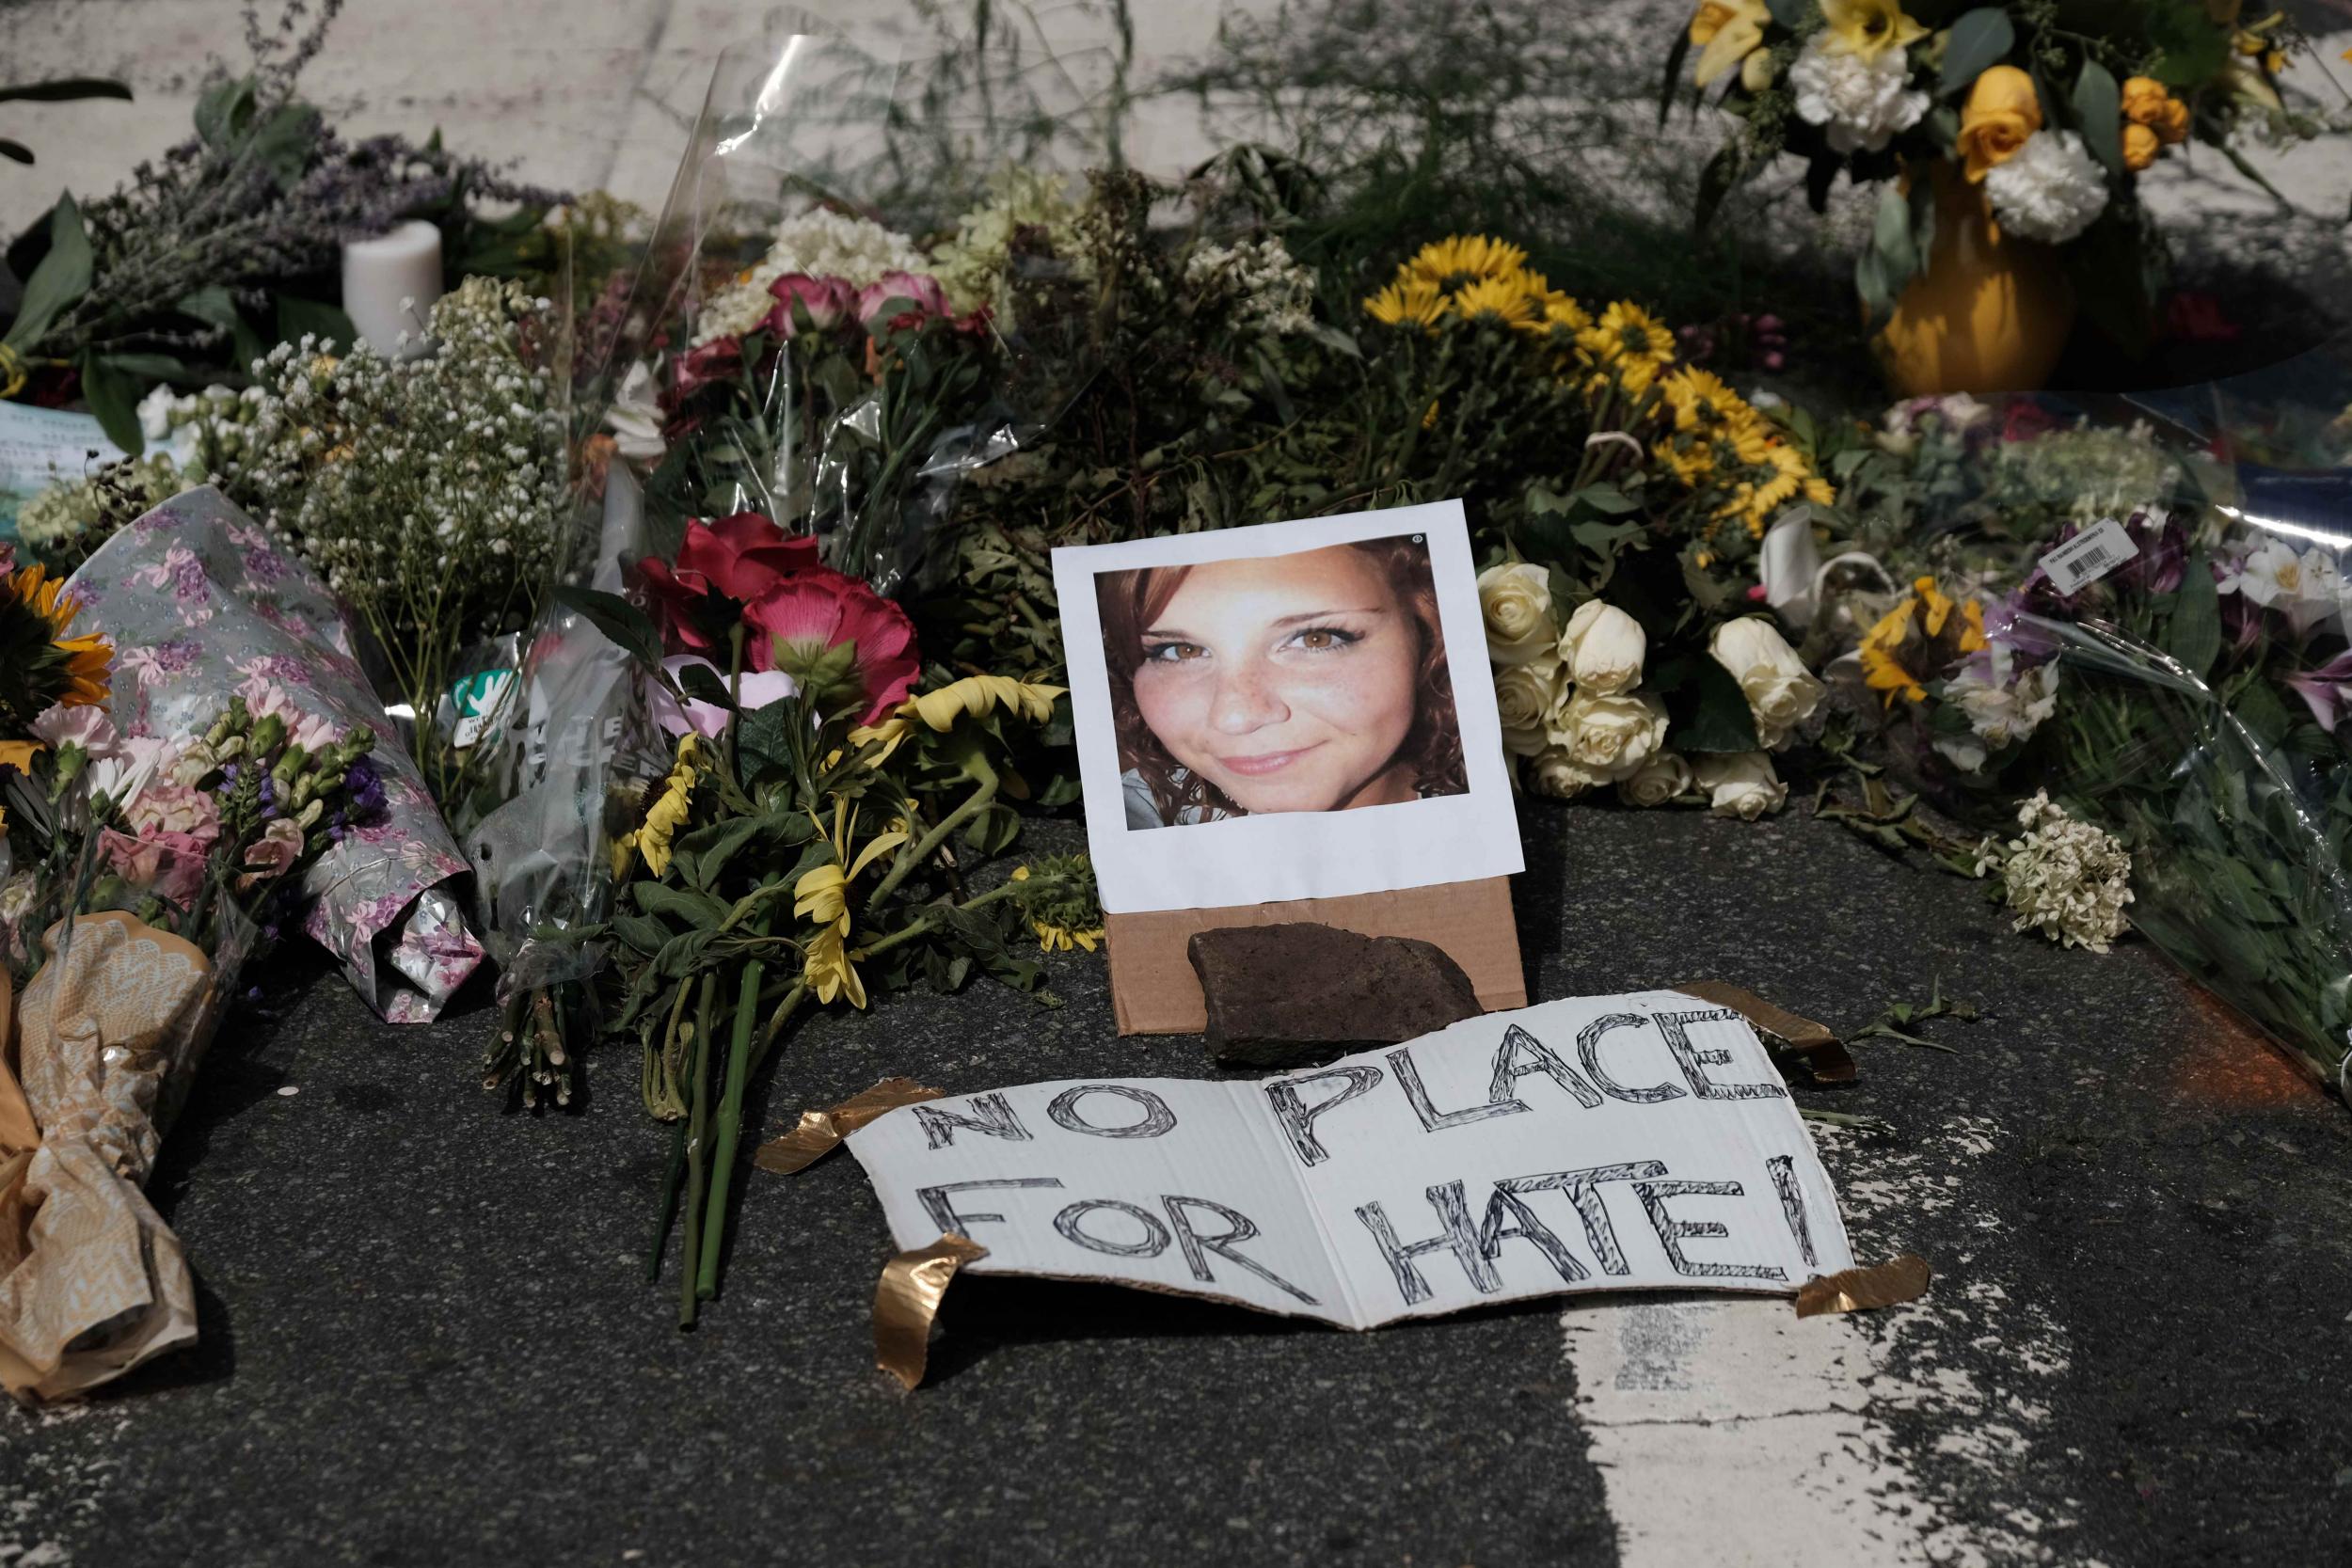 Flowers and a photo of Heather Heyer lie at a makeshift memorial in Charlottesville